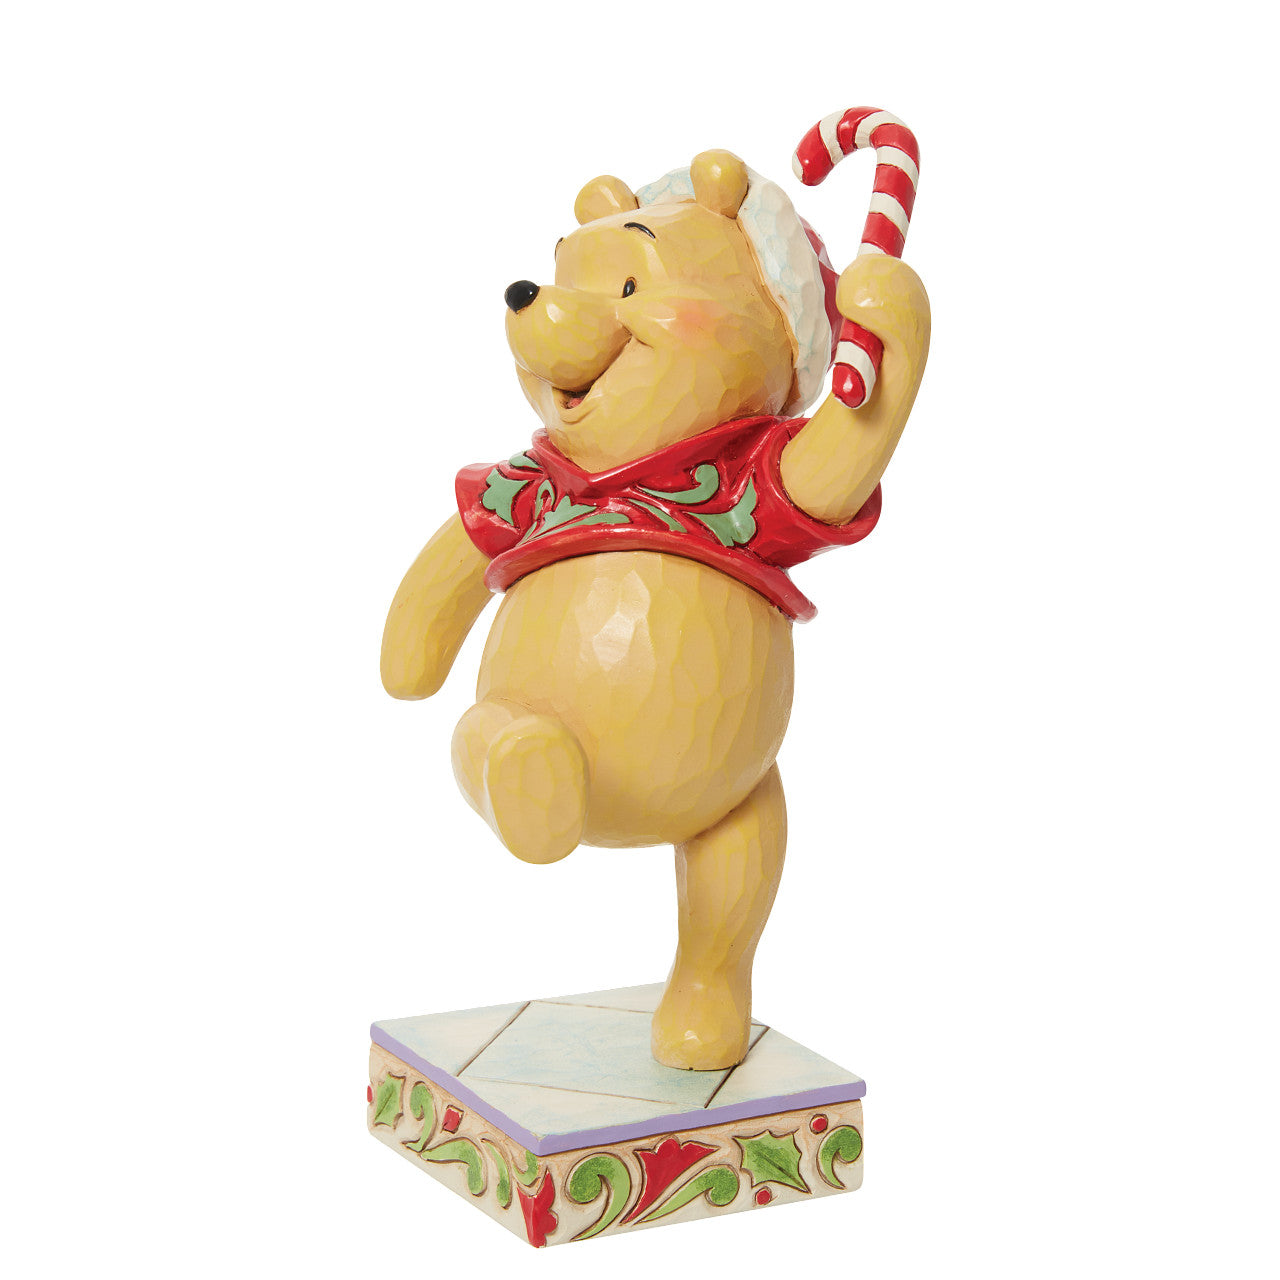 Christmas Sweetie - Winnie the Pooh with Candy Cane